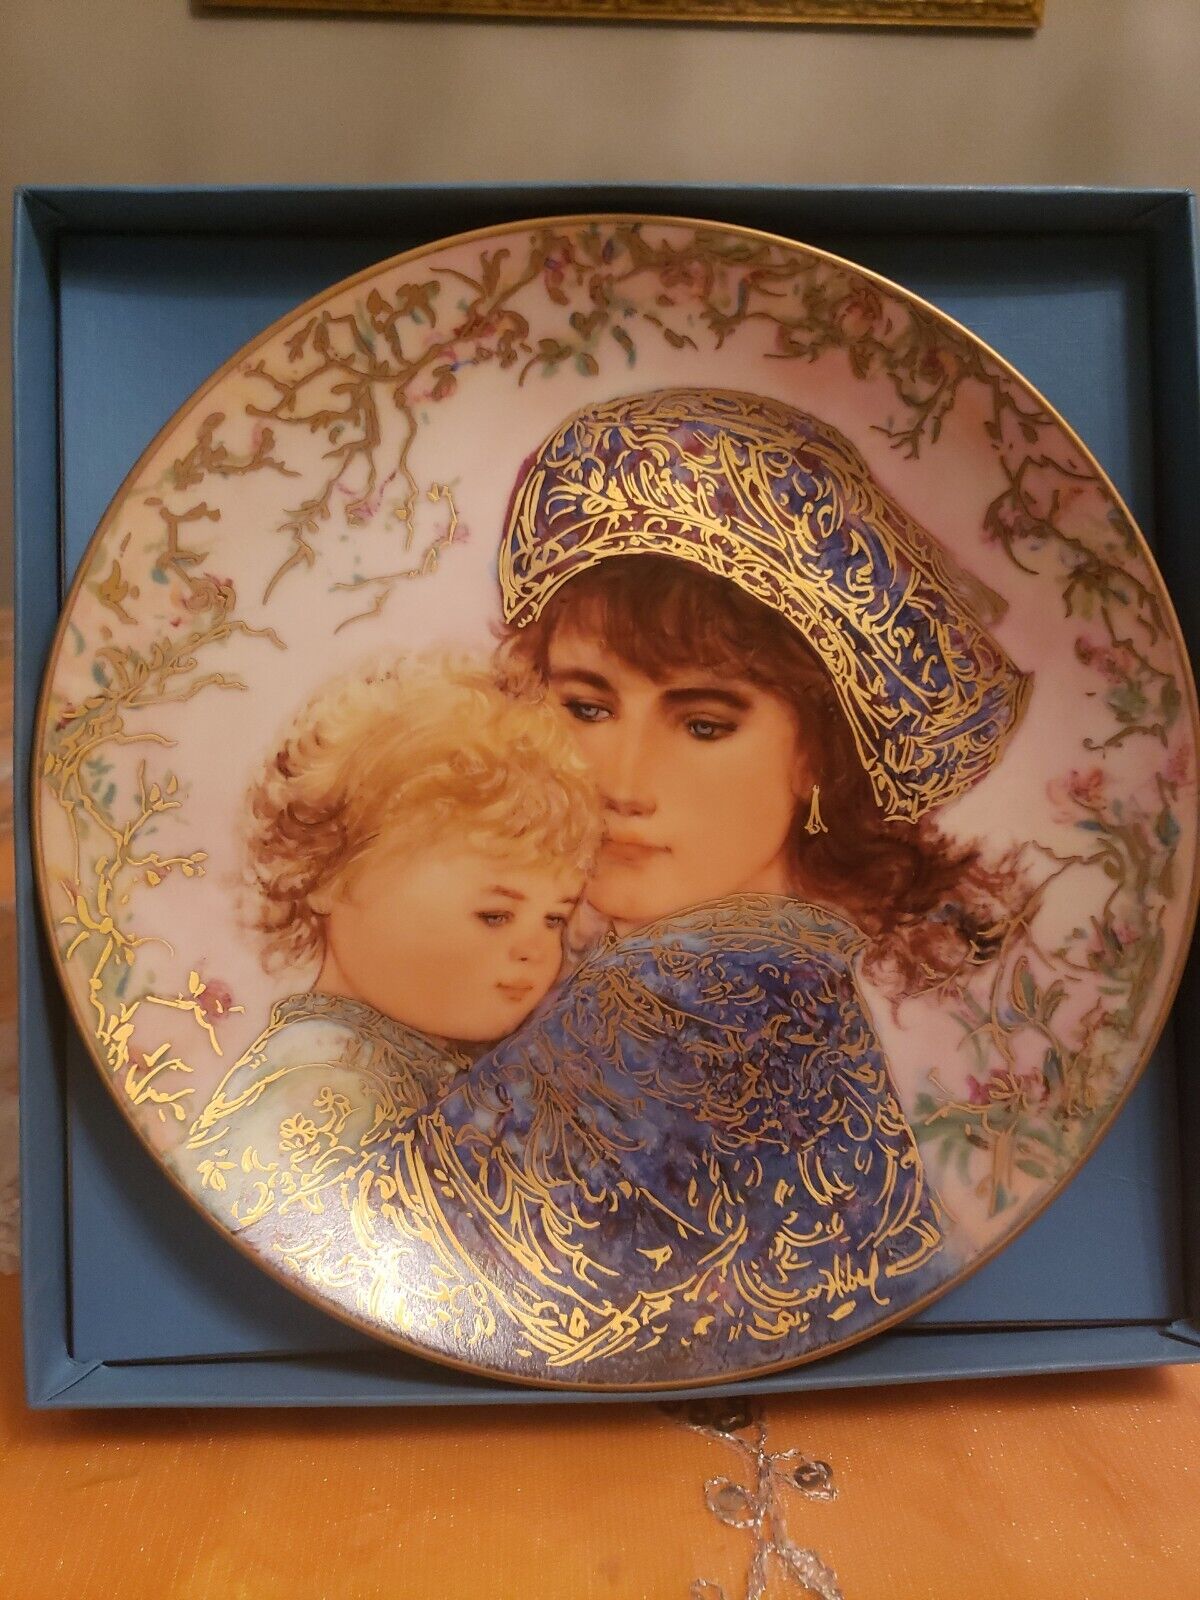 The Edna Hibel Mother's Day Plate 1987 Catherine and Heather with certificate